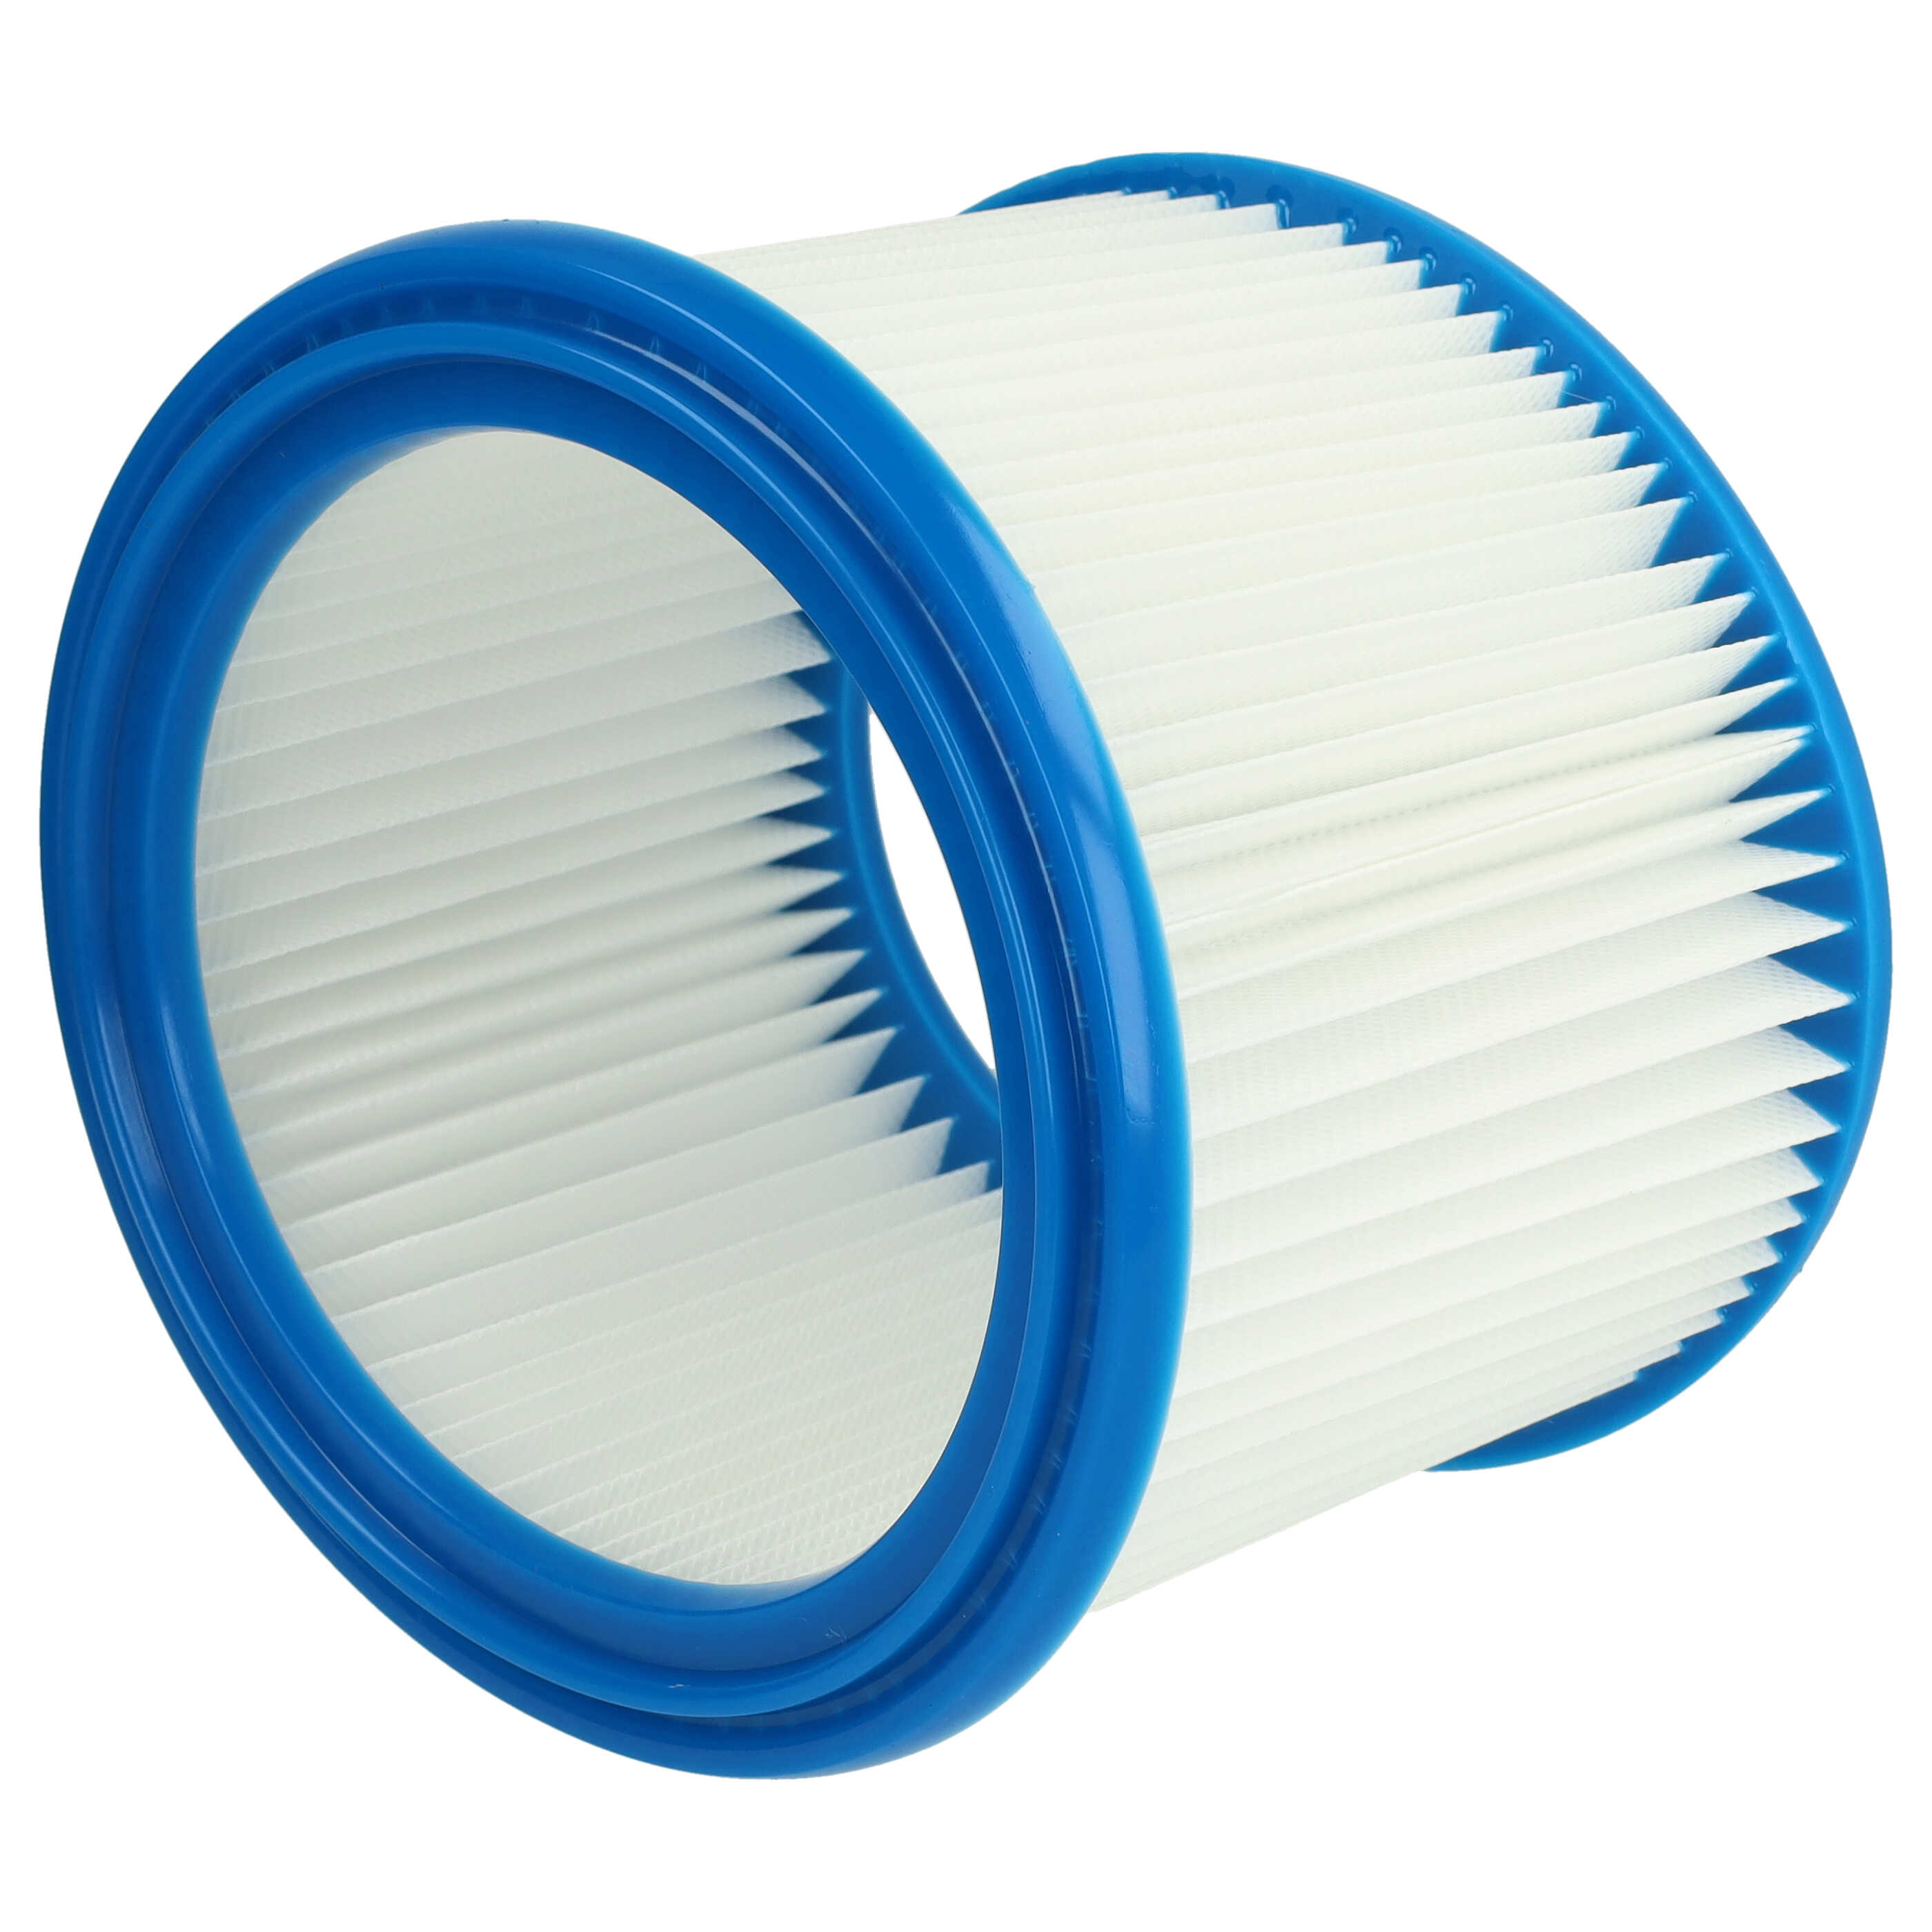 1x round filter replaces Bosch 2607432024 for BoschVacuum Cleaner, white / blue